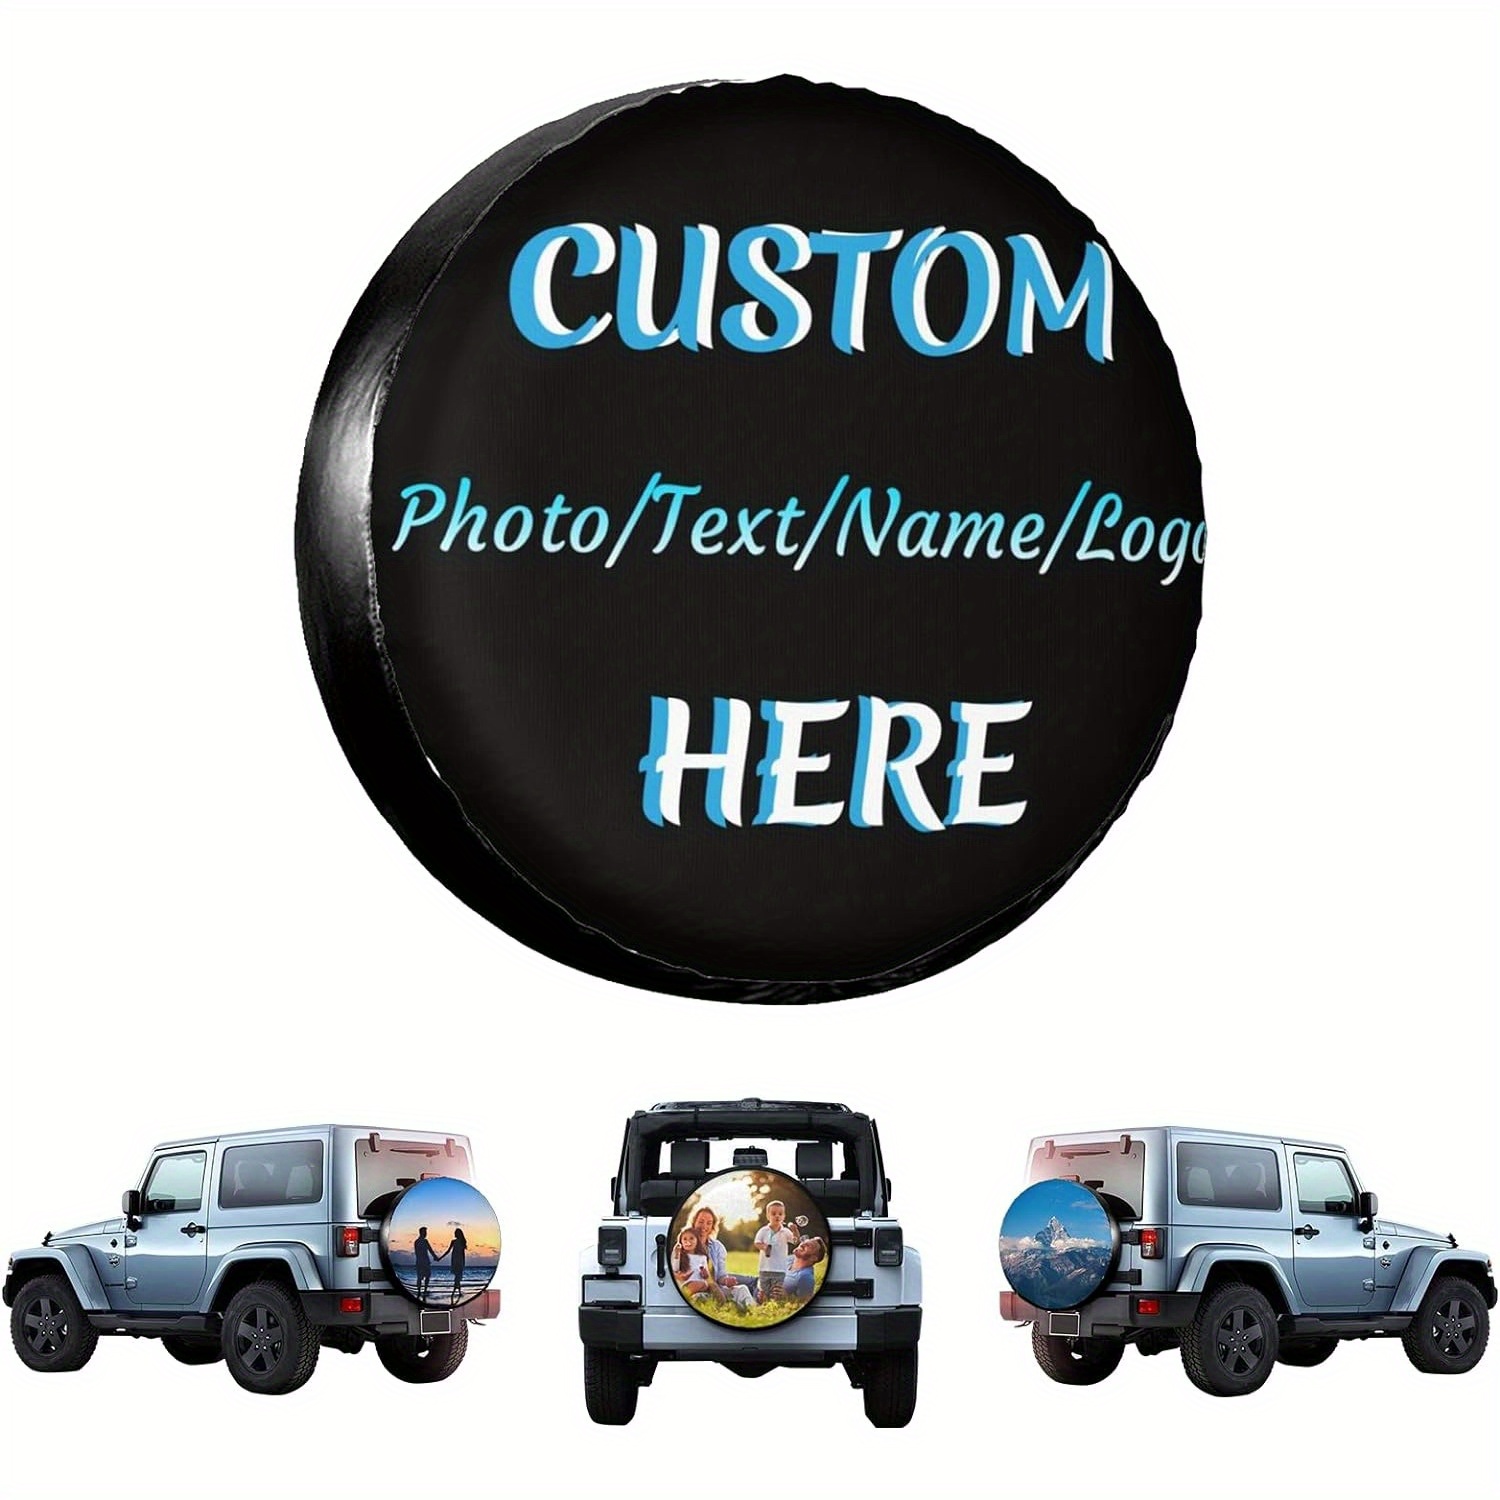 

Customizable Waterproof Spare Tire Cover - Personalize With Your Own Design, Dust-proof & Fit For Cars, Rvs, Suvs & Trailers